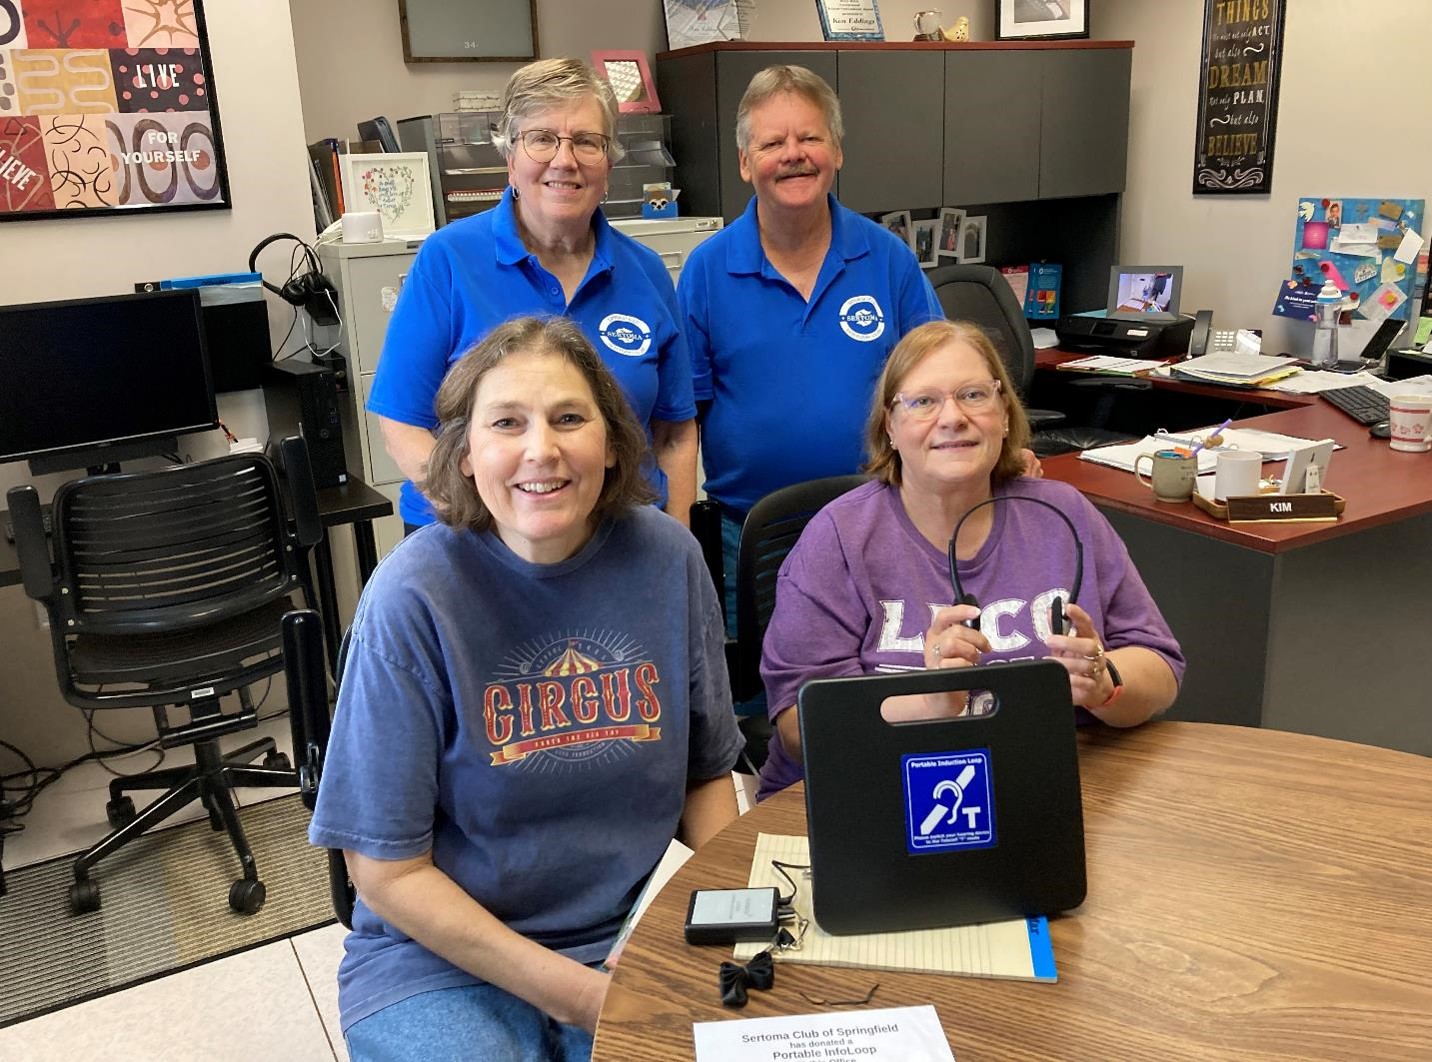 Photo: (seated) Kim Eddings and Elaine Higgason of Accessibility Services; accept the donation of a Portable InfoLoop device from members of the Sertoma Club of Springfield (back) Cheryl Pence and Keith Baker.